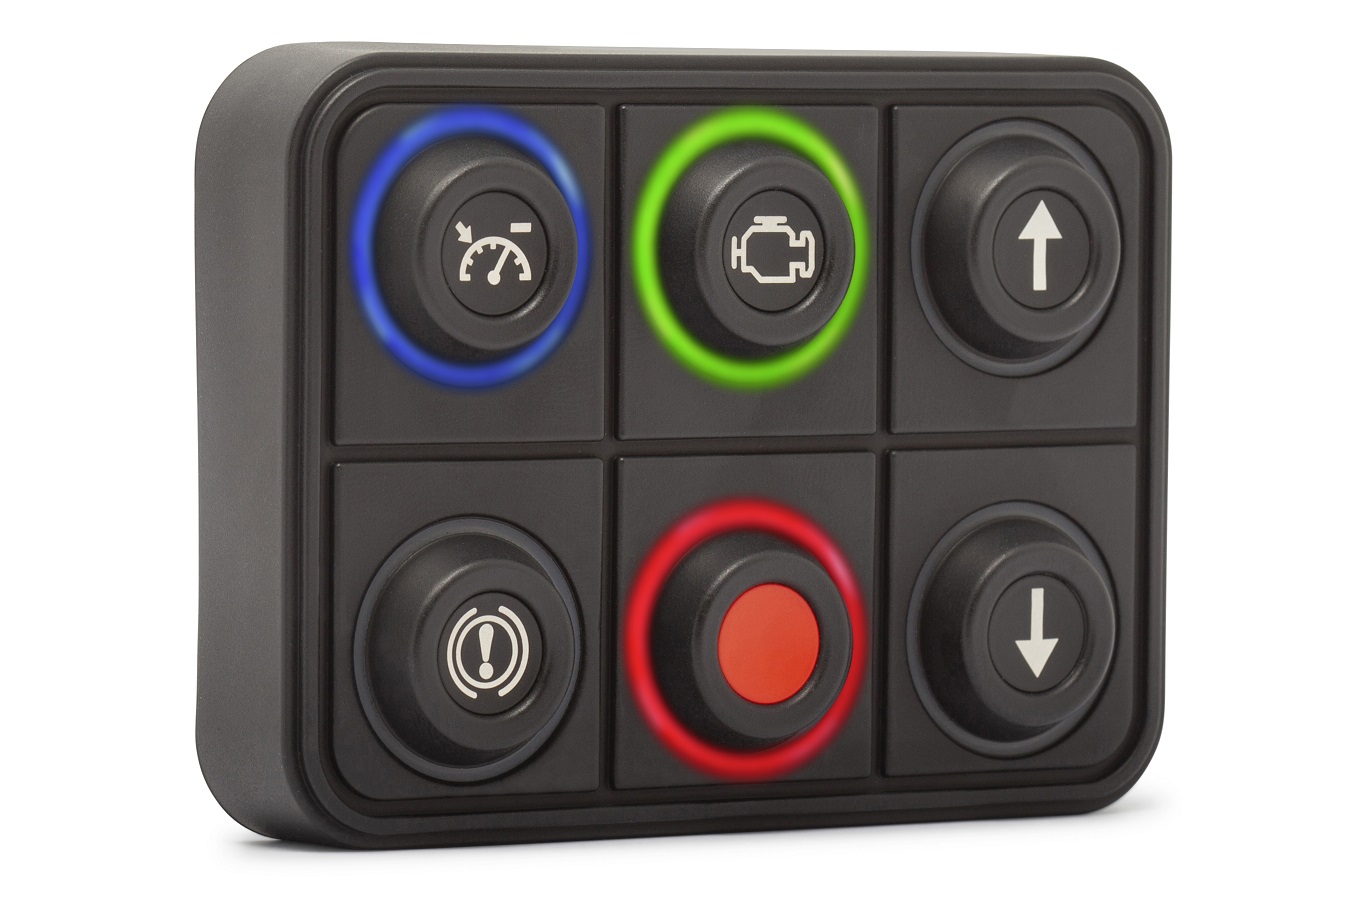 6 button CANBUS keypad